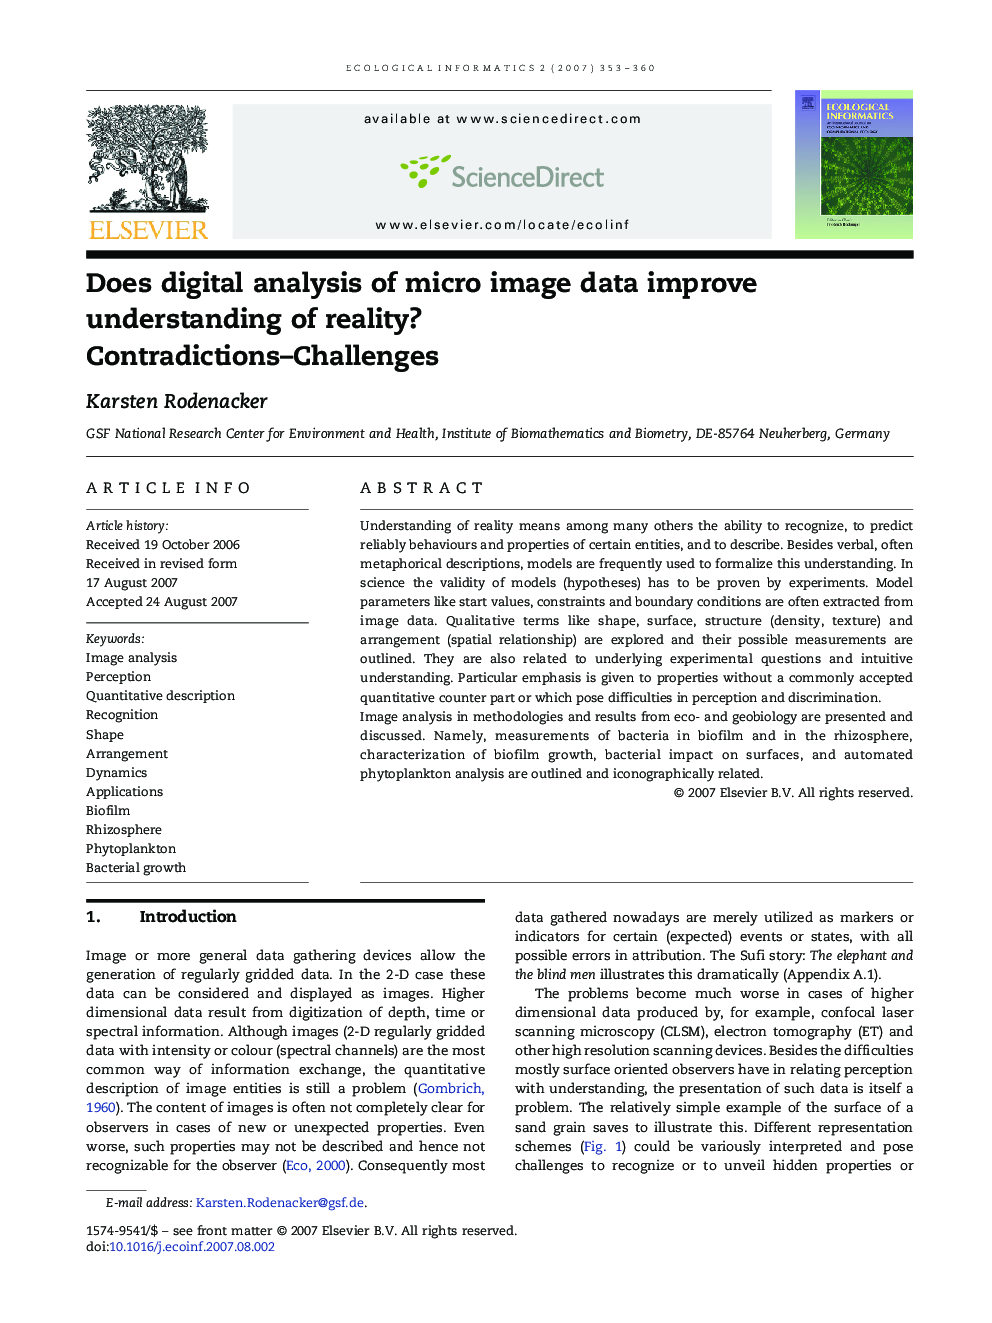 Does digital analysis of micro image data improve understanding of reality?Contradictions–Challenges: Contradictions–Challenges